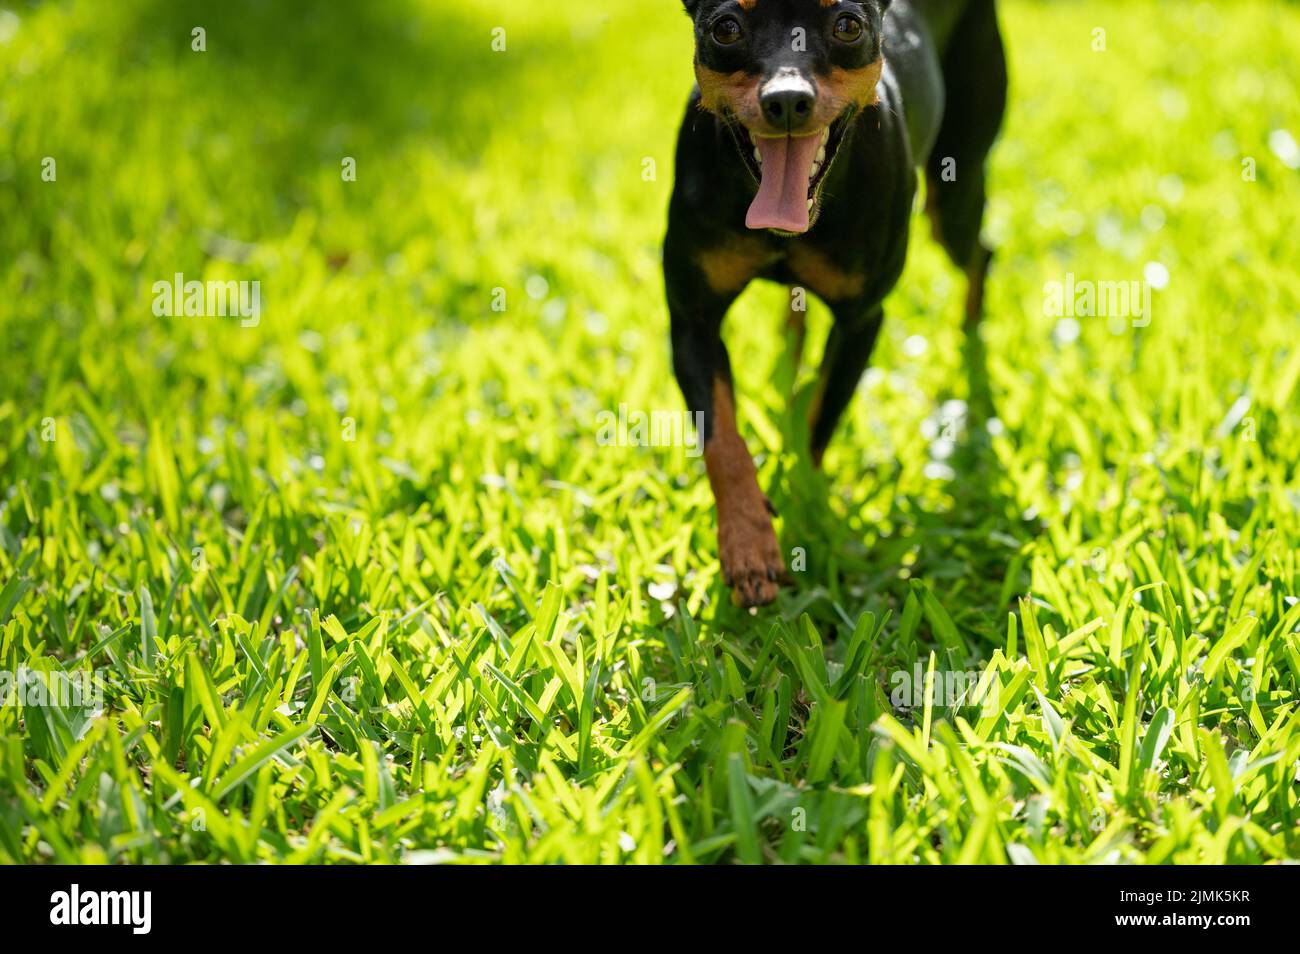 Cute portrait of pincher dog on green blurred background Stock Photo